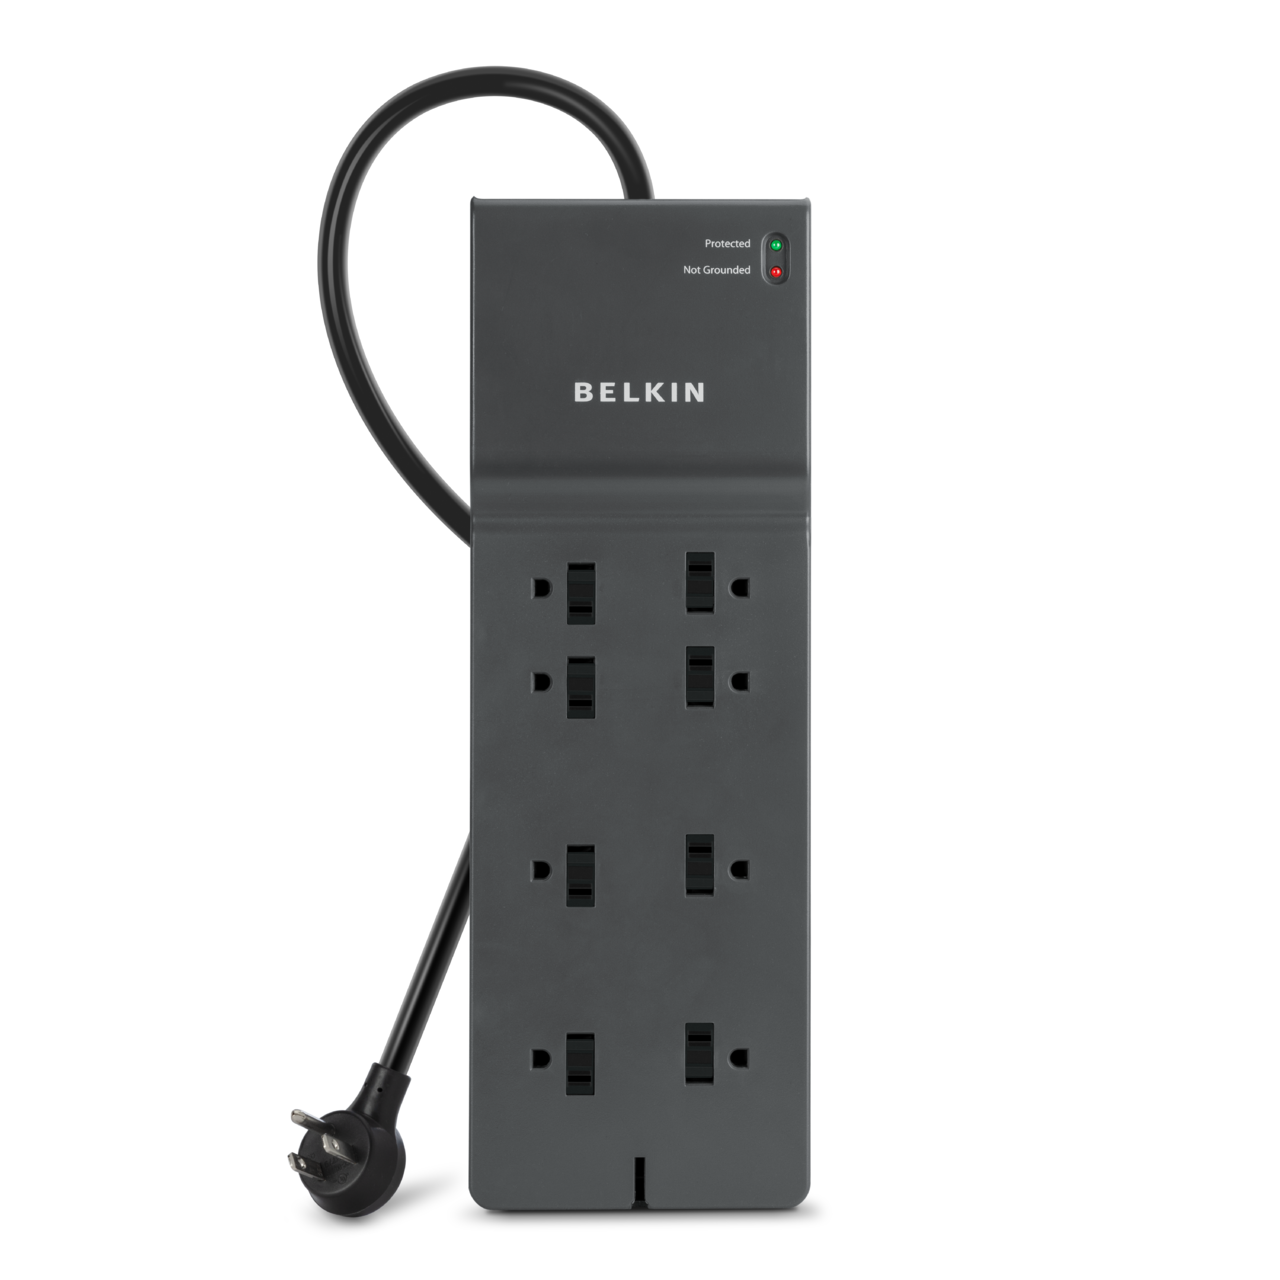 BSEED Surge Protector Power Strip Home Appliance, 3 Outlet Power